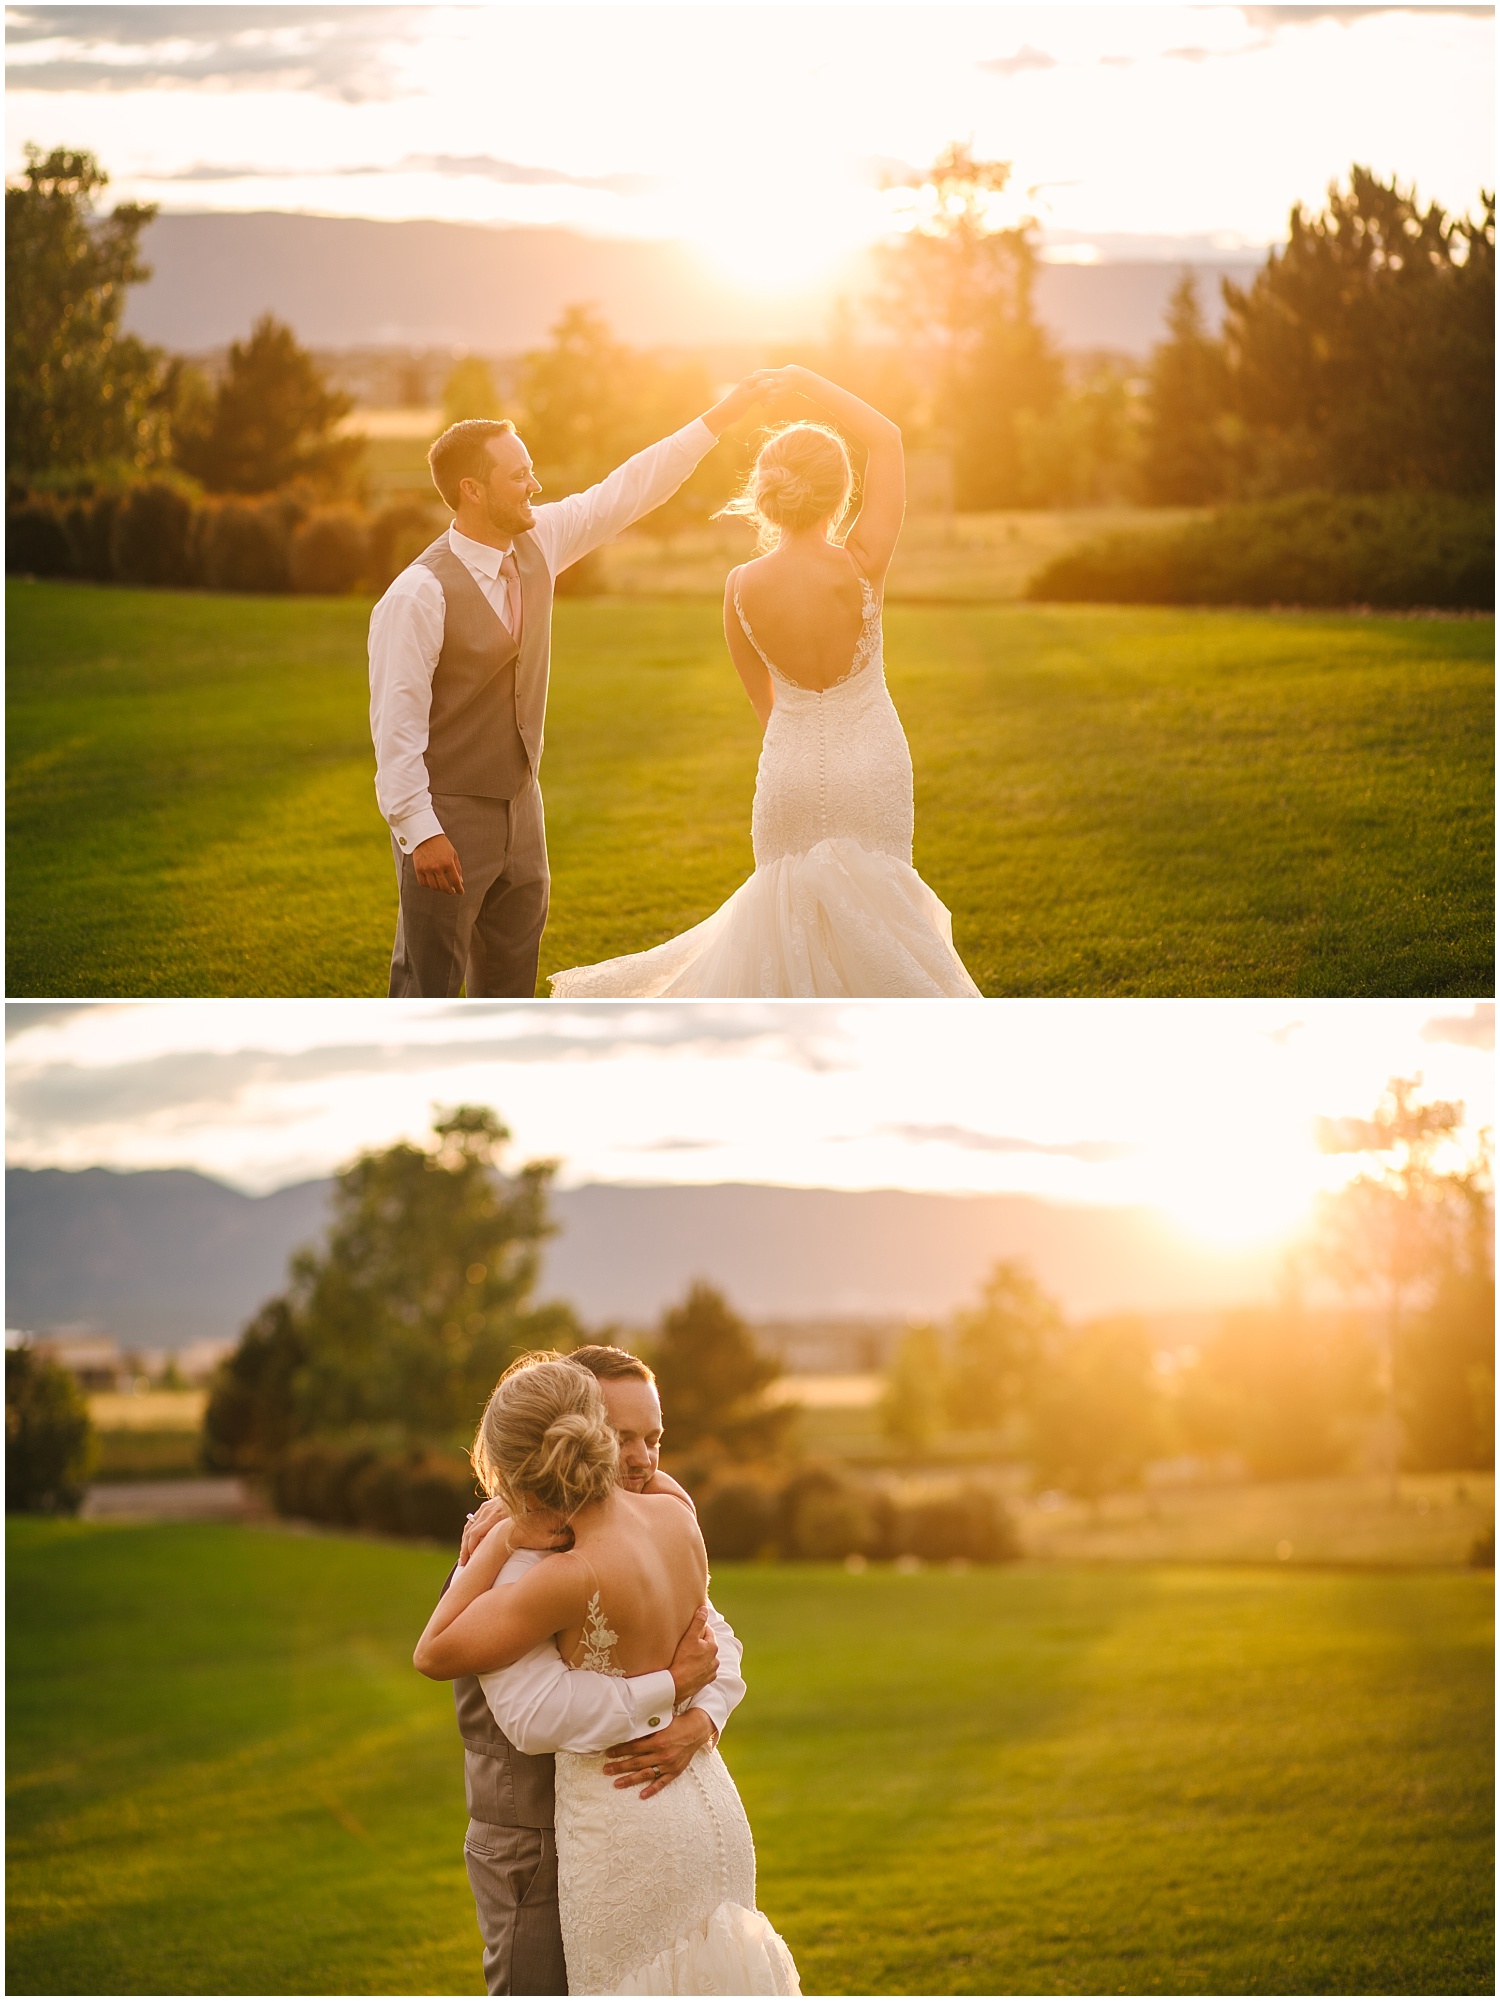 Bride and groom dancing at golden hour as sun sets in Colorado Springs